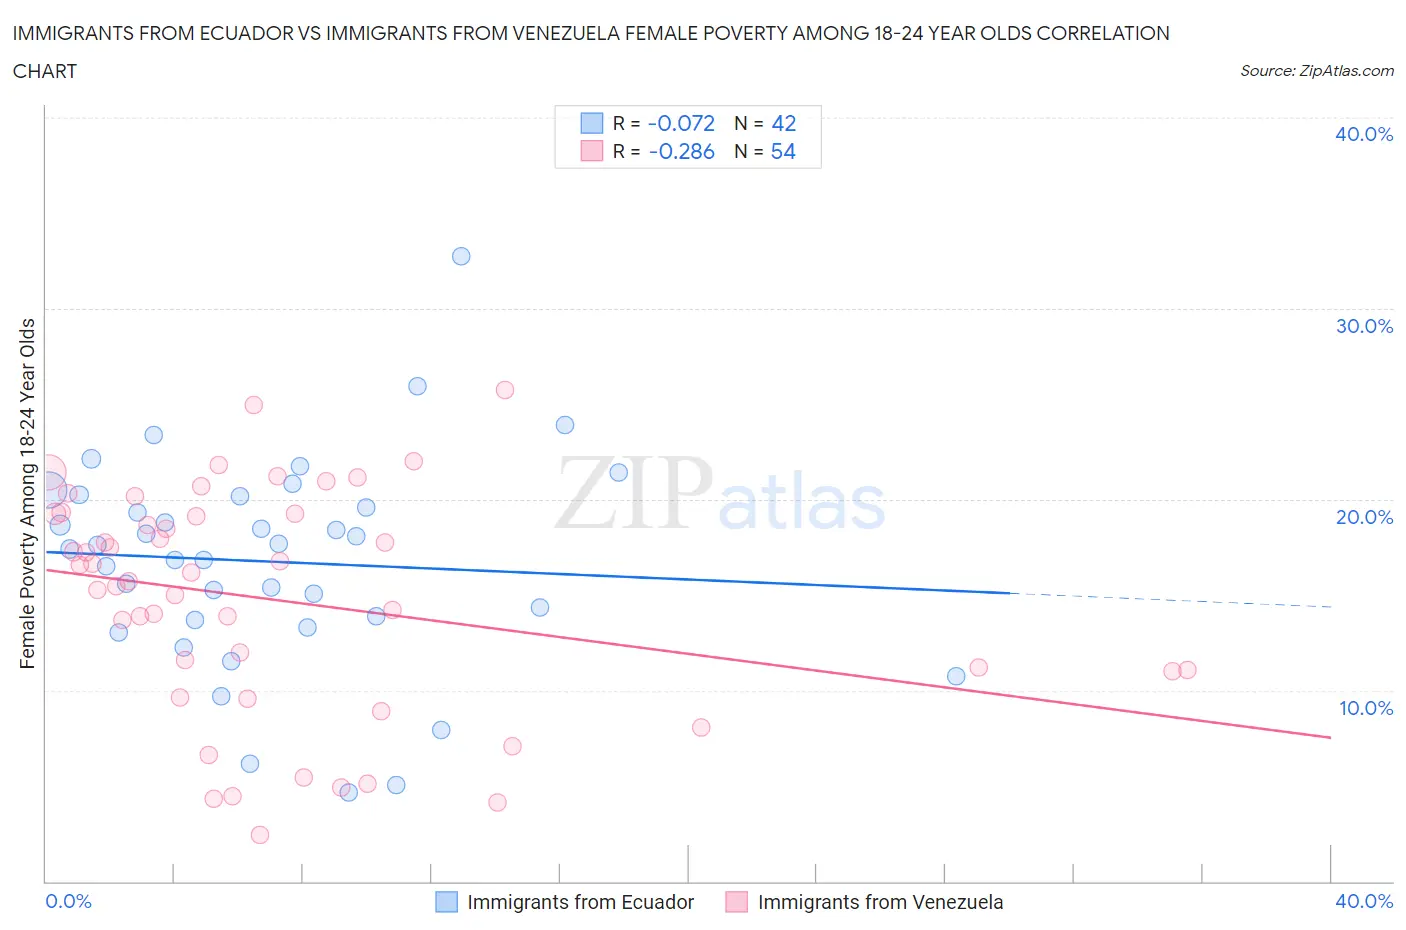 Immigrants from Ecuador vs Immigrants from Venezuela Female Poverty Among 18-24 Year Olds